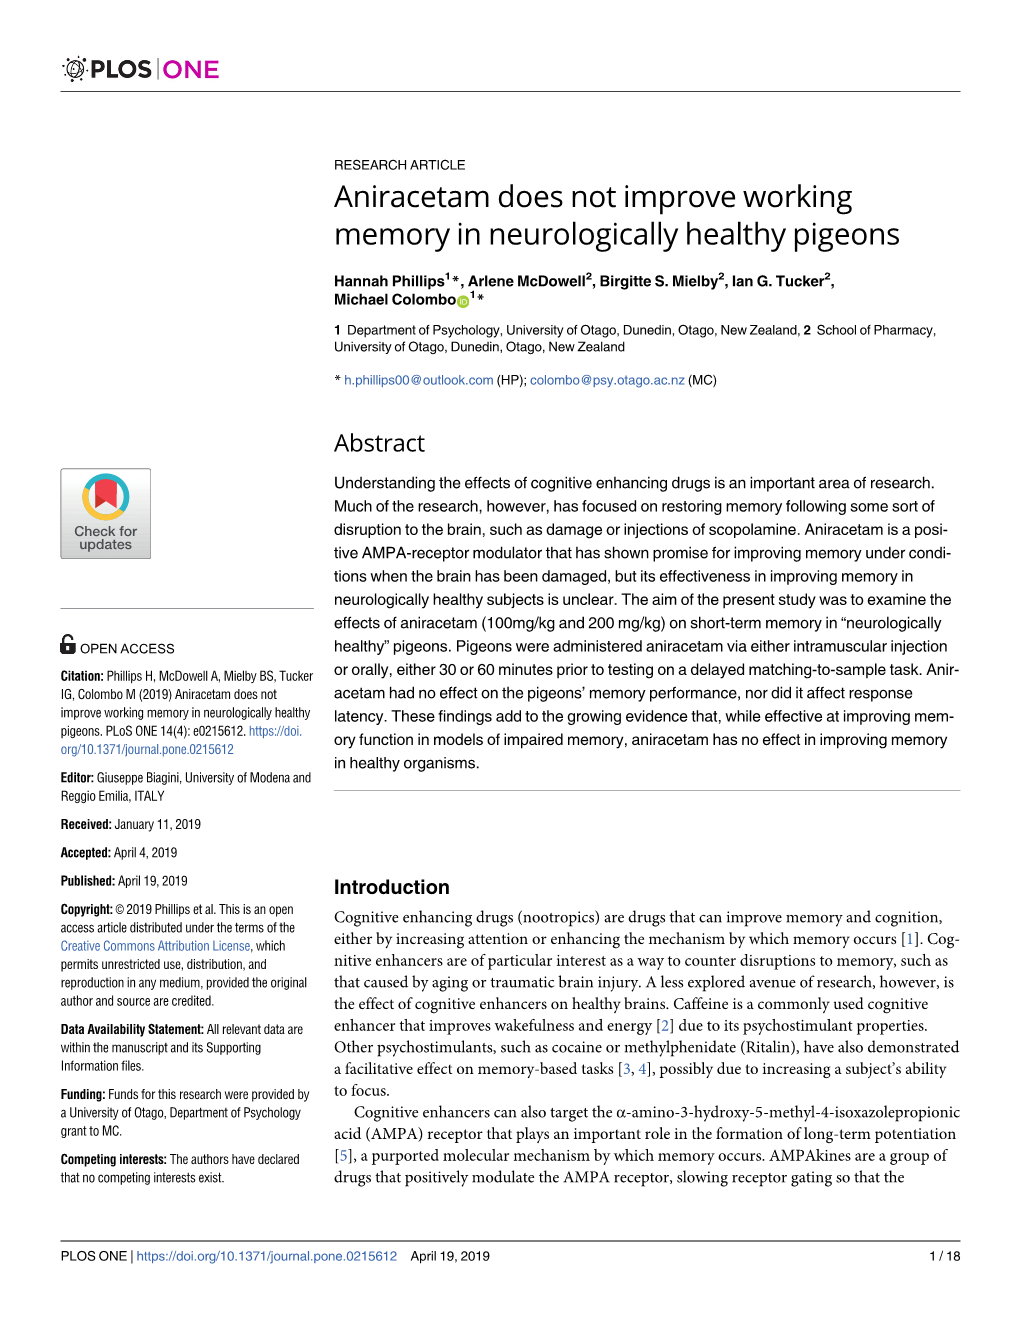 Aniracetam Does Not Improve Working Memory in Neurologically Healthy Pigeons